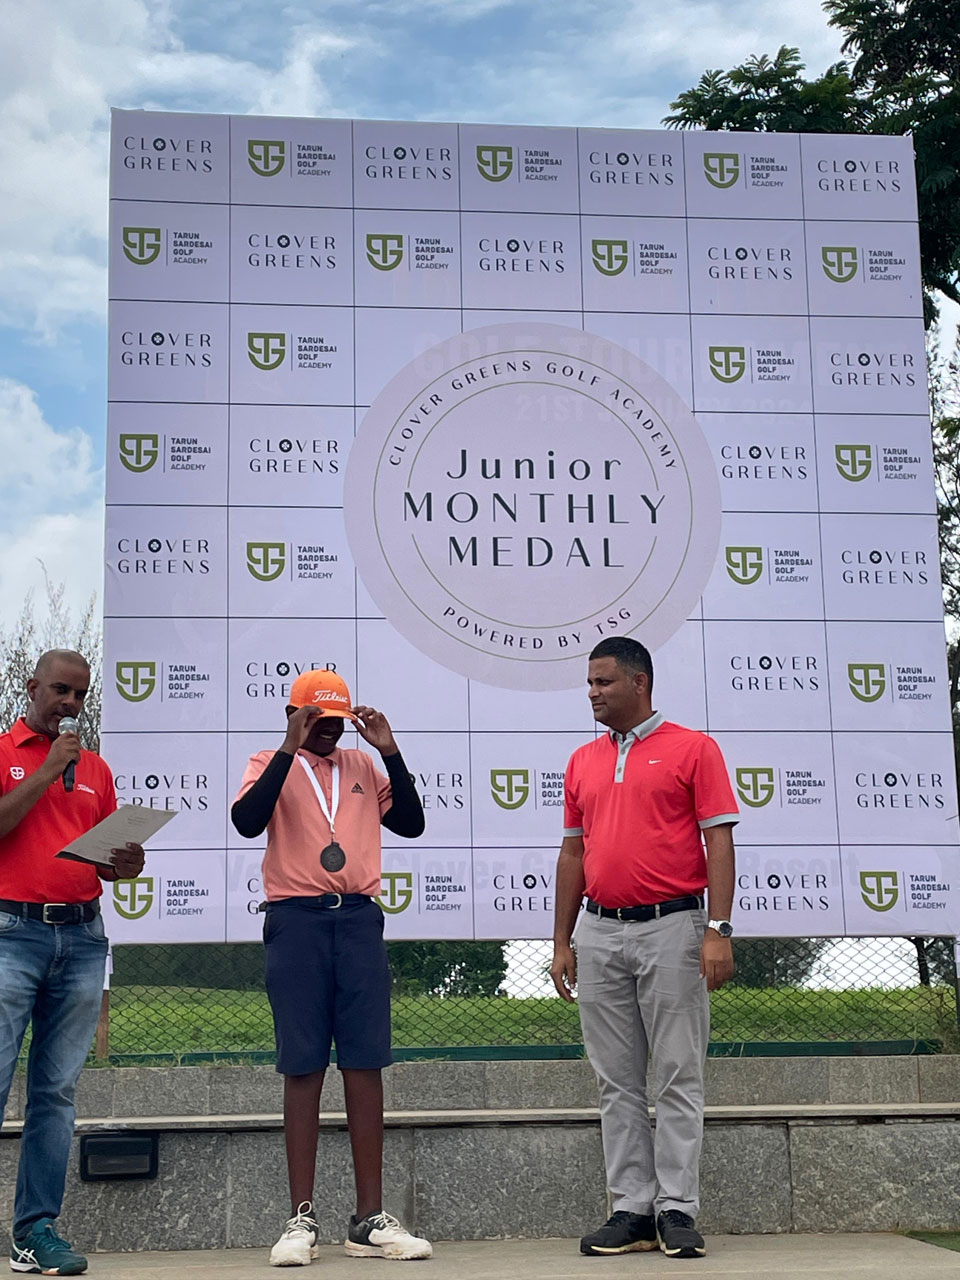 S Nandan finished as 2nd runner up in the 'C' Boys Category at the Clover Greens Junior Monthly Medal powered by TSG, held at Clover Greens Golf Course in Bangalore.